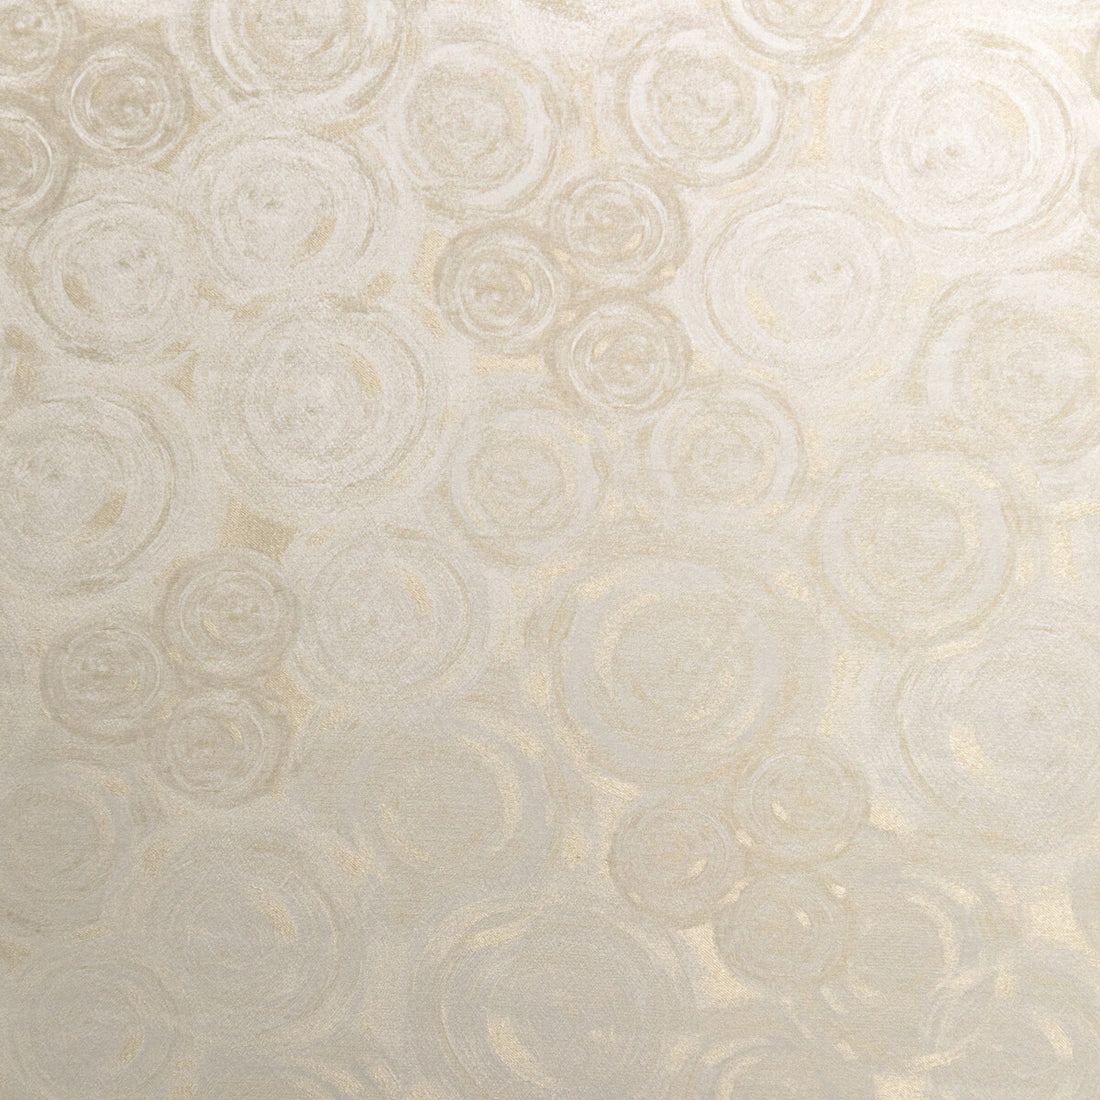 Silk Cosmos fabric in gold color - pattern 4956.416.0 - by Kravet Couture in the Modern Luxe Silk Luster collection